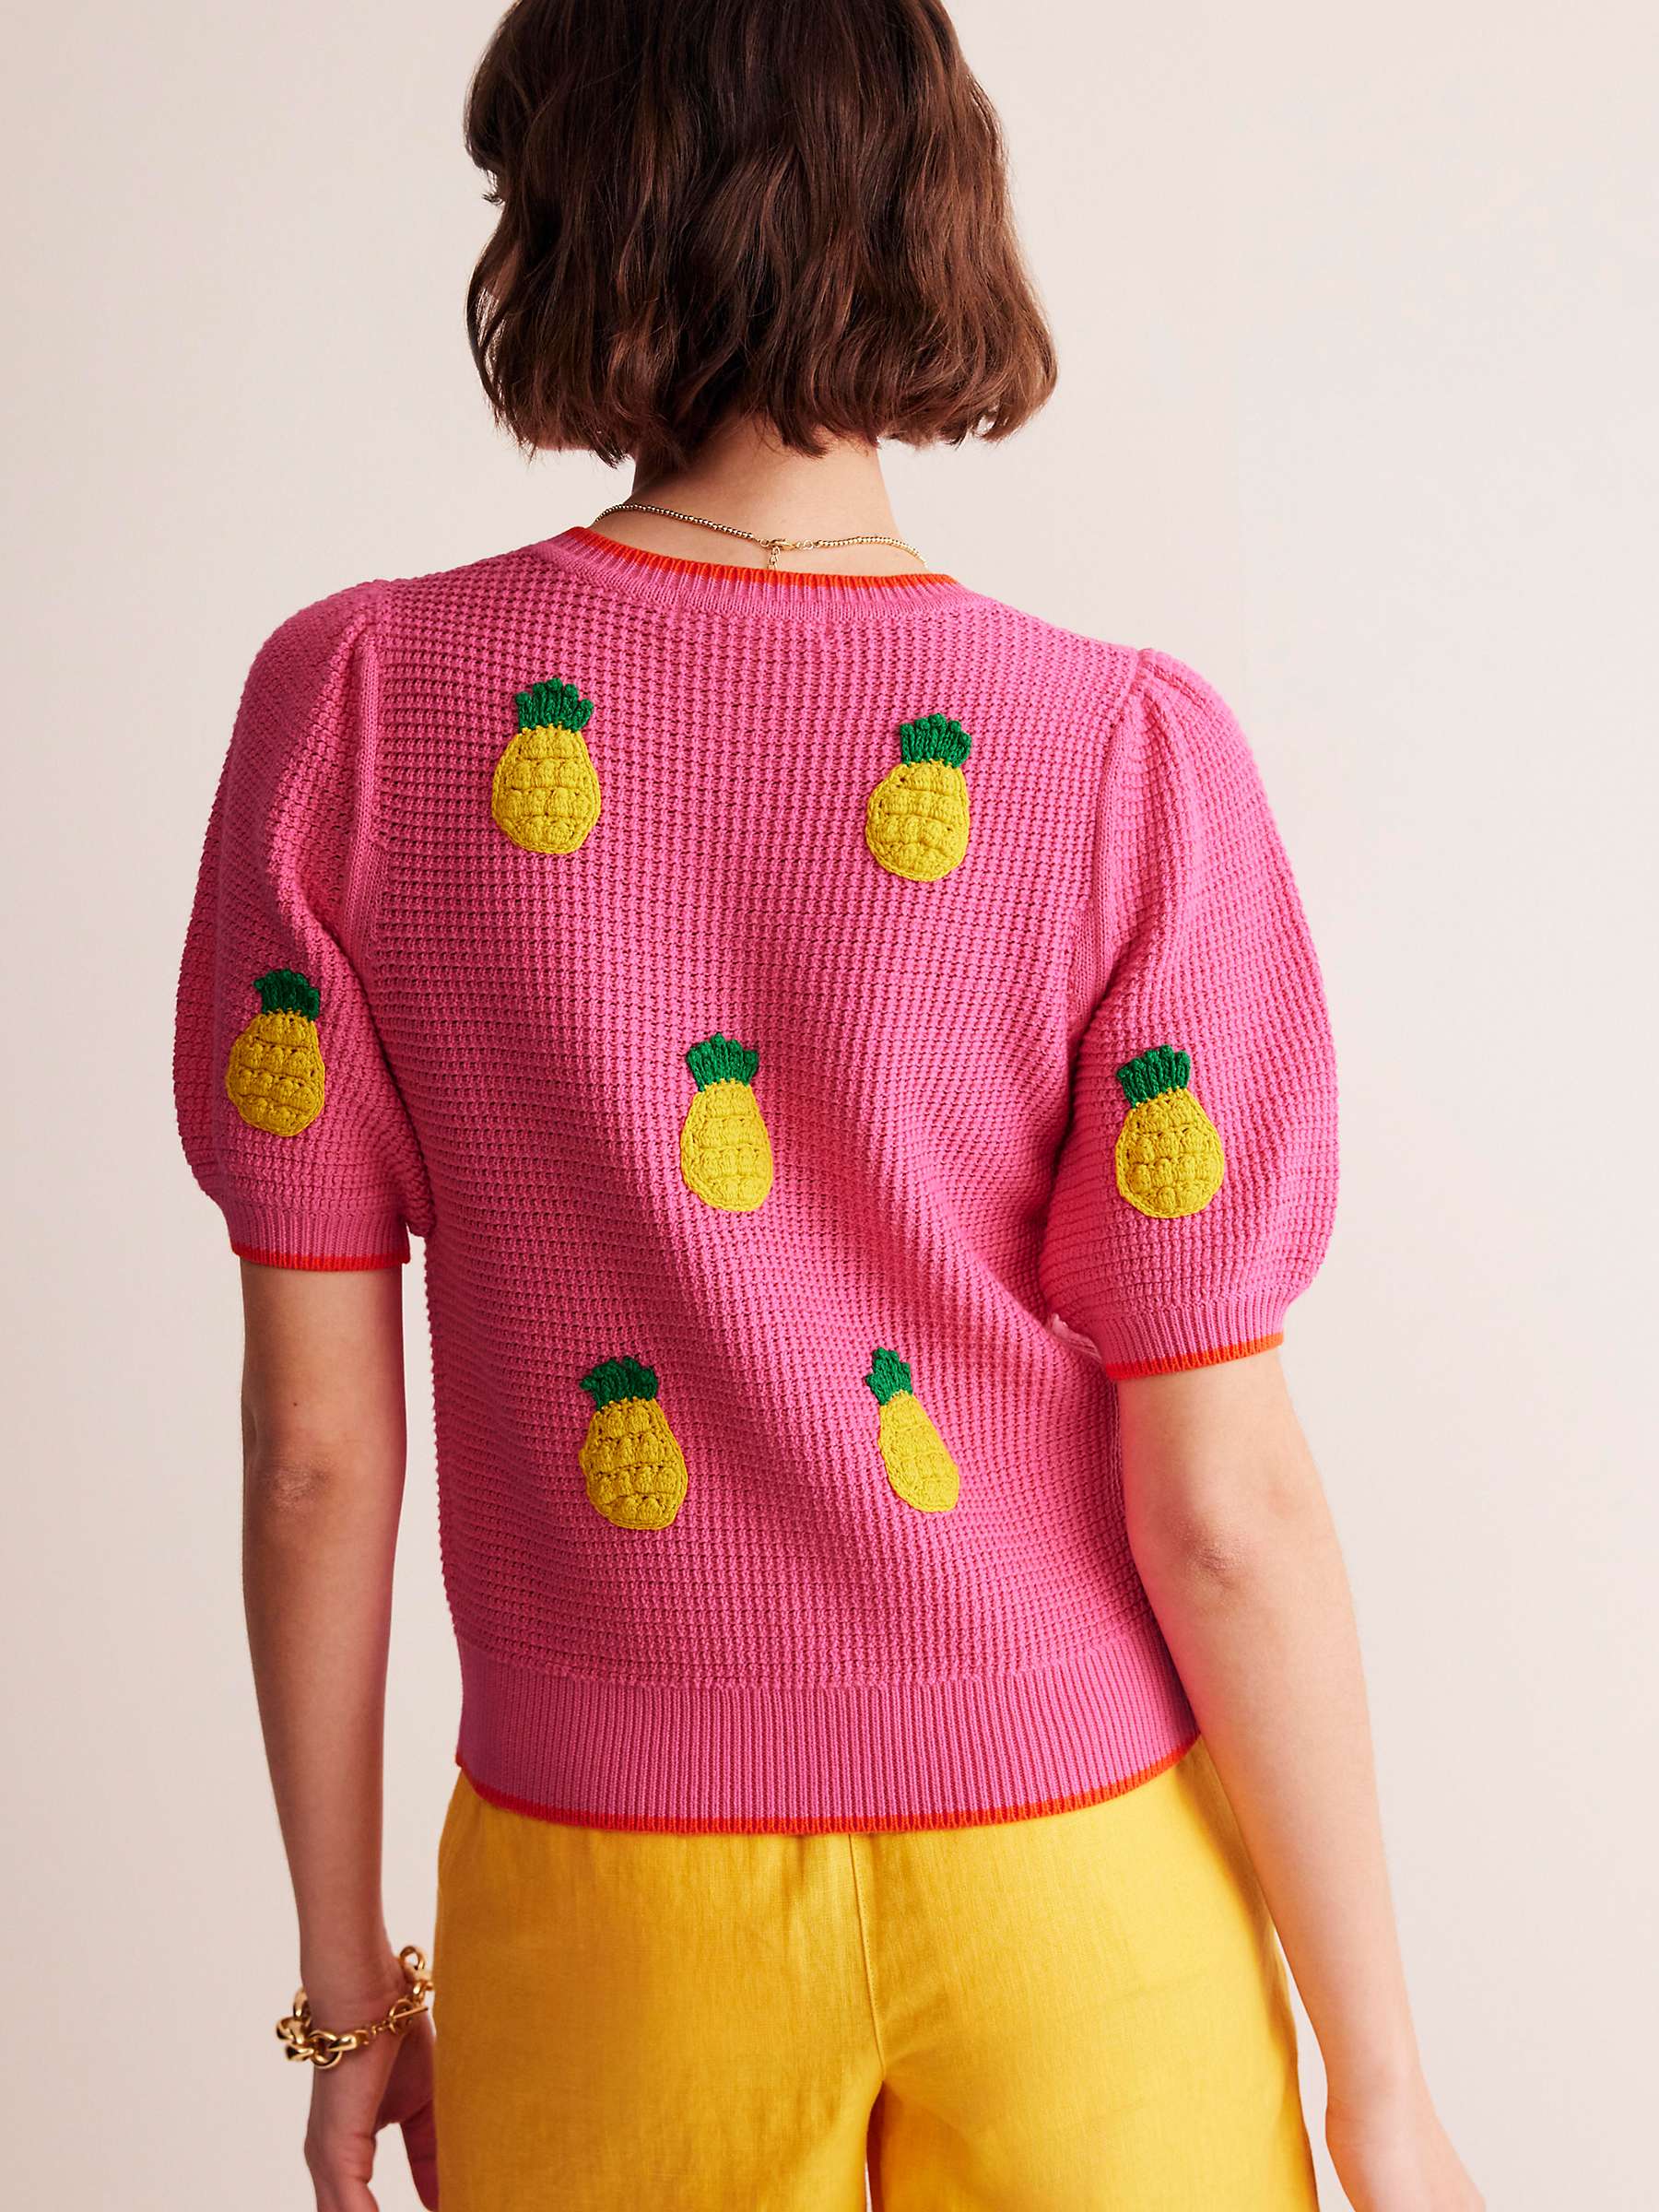 Buy Boden Embroidered Pineapples Short Sleeve Cardigan, Pink Online at johnlewis.com